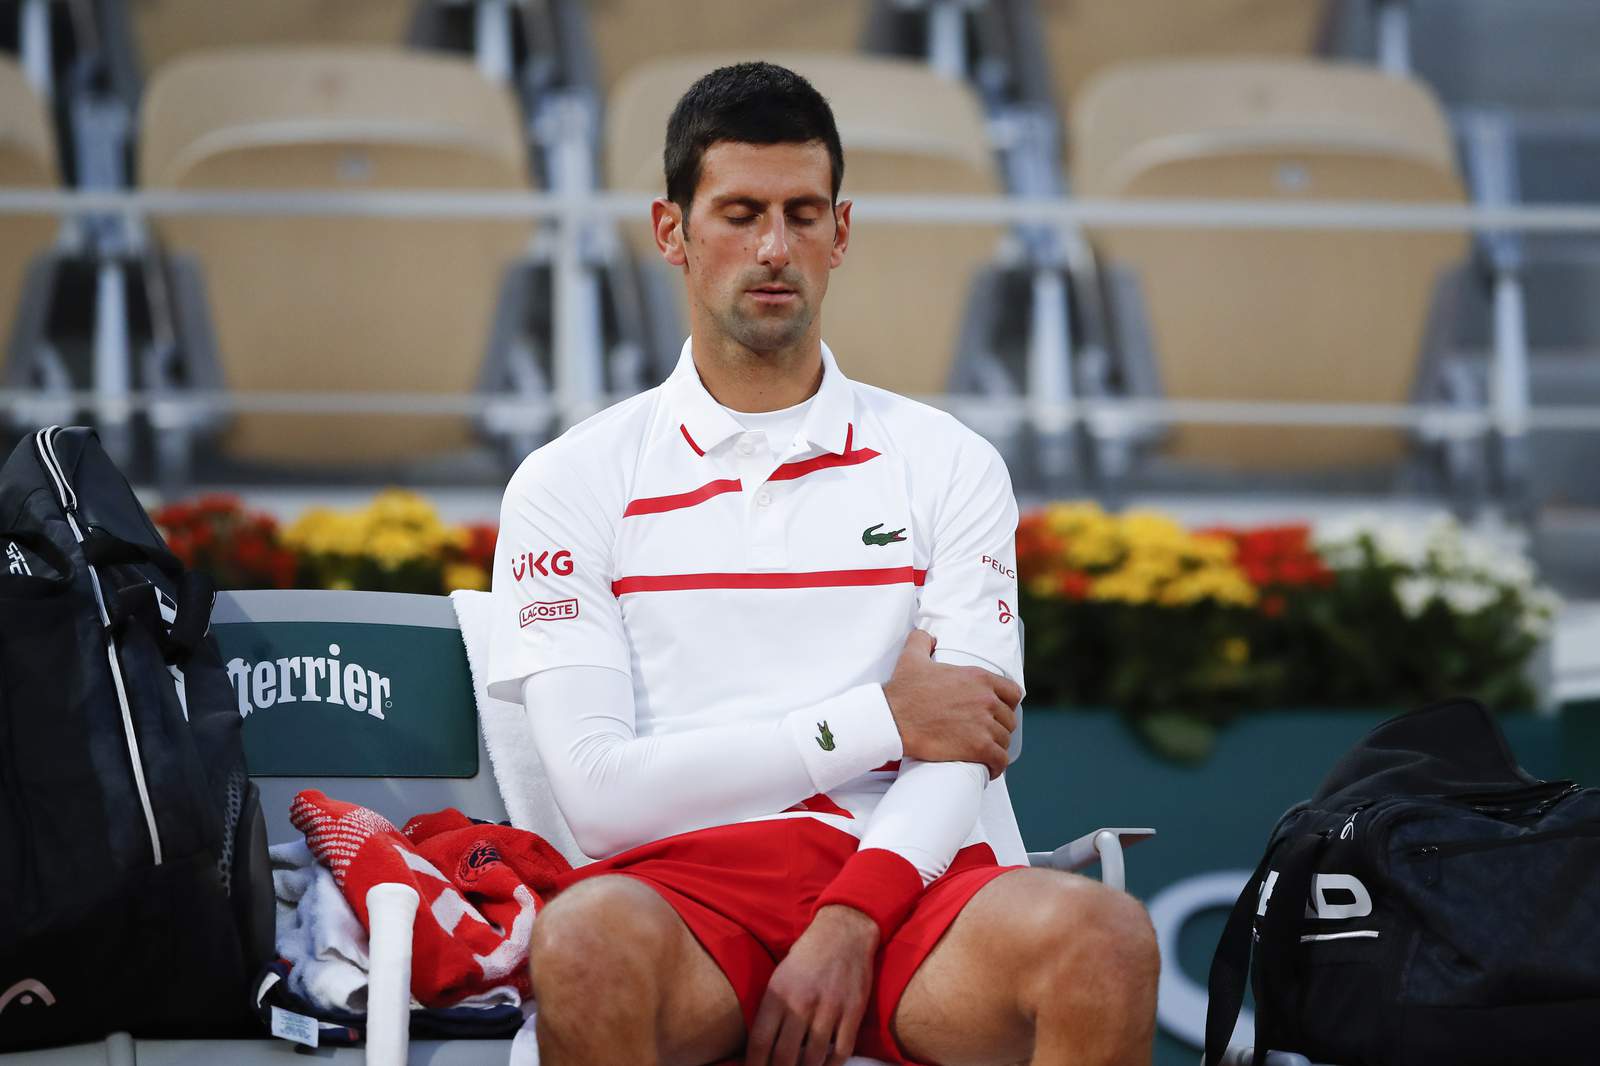 Djokovic deals with arm issue in Paris; gets Tsitsipas in SF